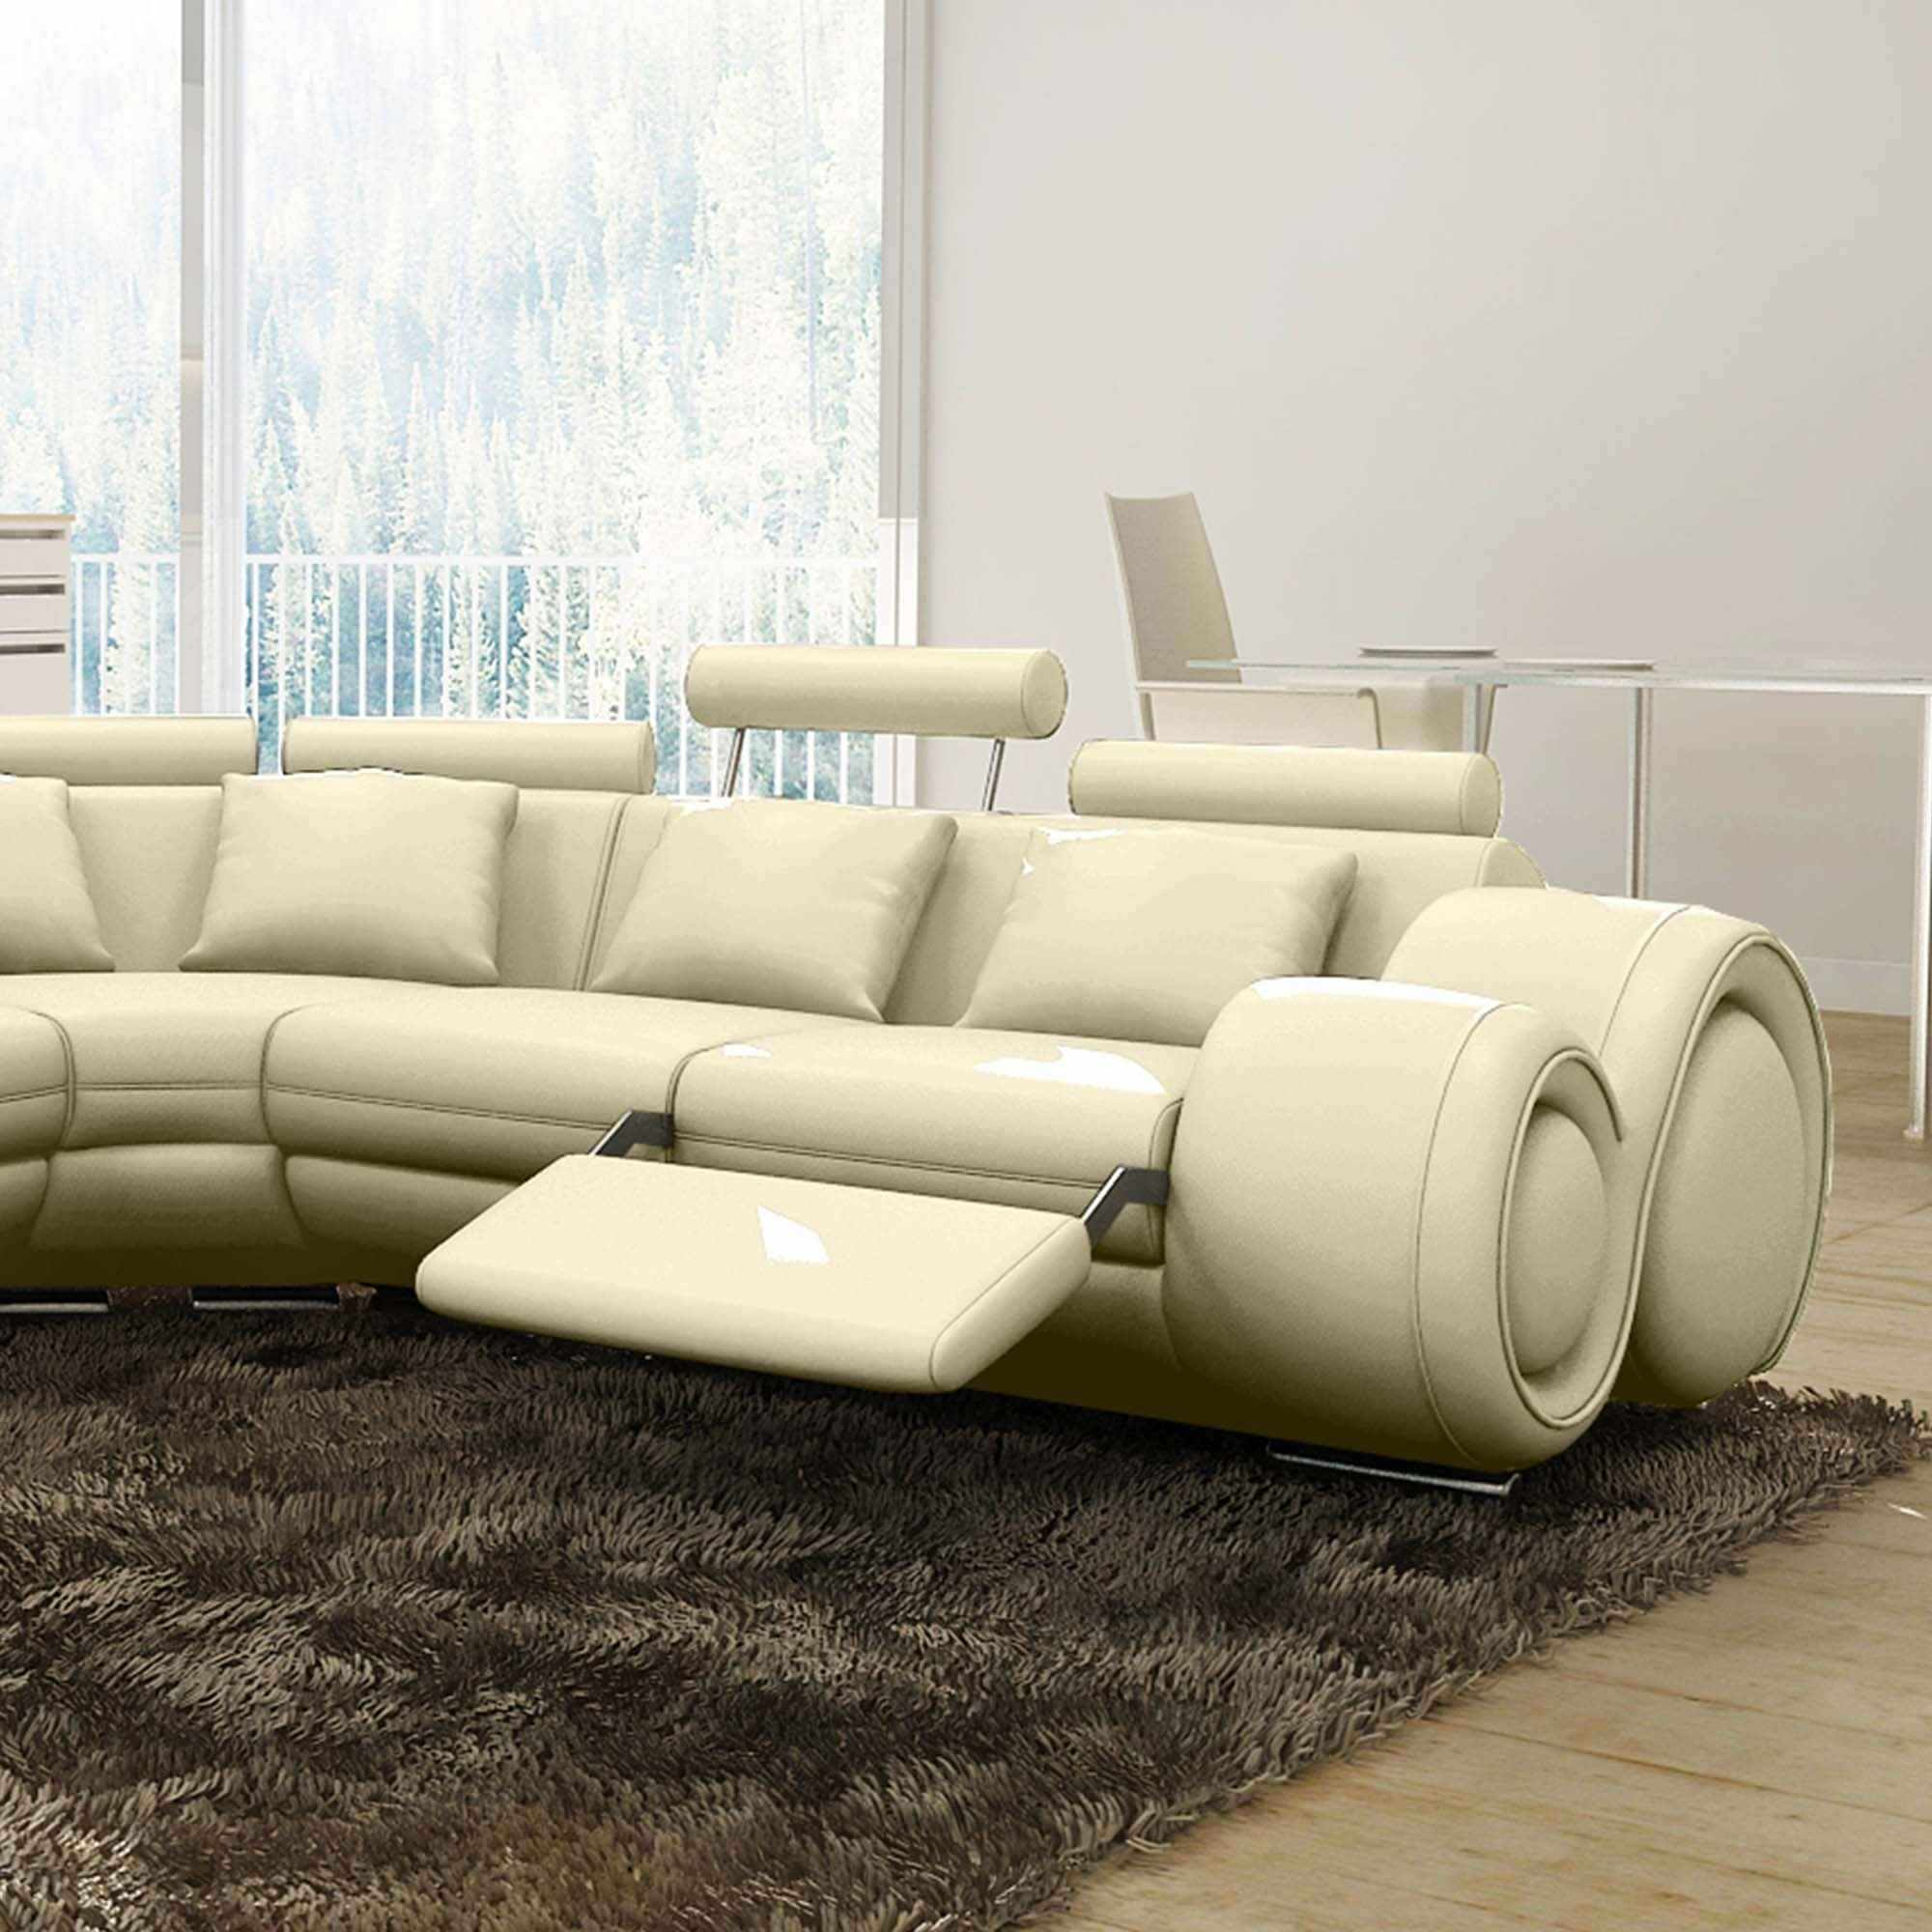 Canape D Angle Cuir Beige Positions Relax Oslo Angle ... concernant Canape D Angle Avec Relax